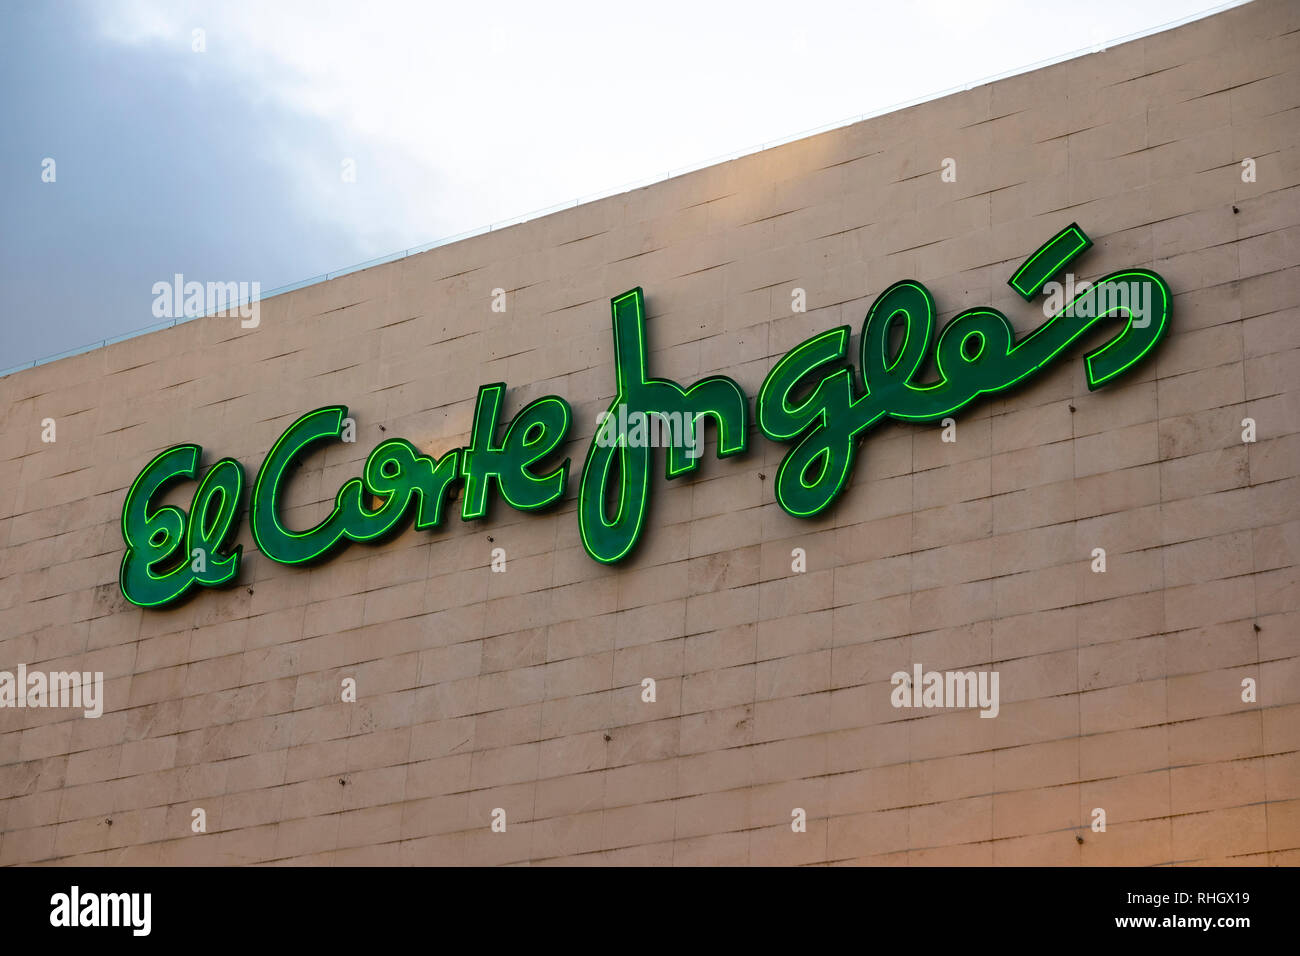 El Corte Ingles department store in Seville, Spain. El Corte Ingles is  biggest department store group in Europe and 4th worldwide. It exists since  194 Stock Photo - Alamy